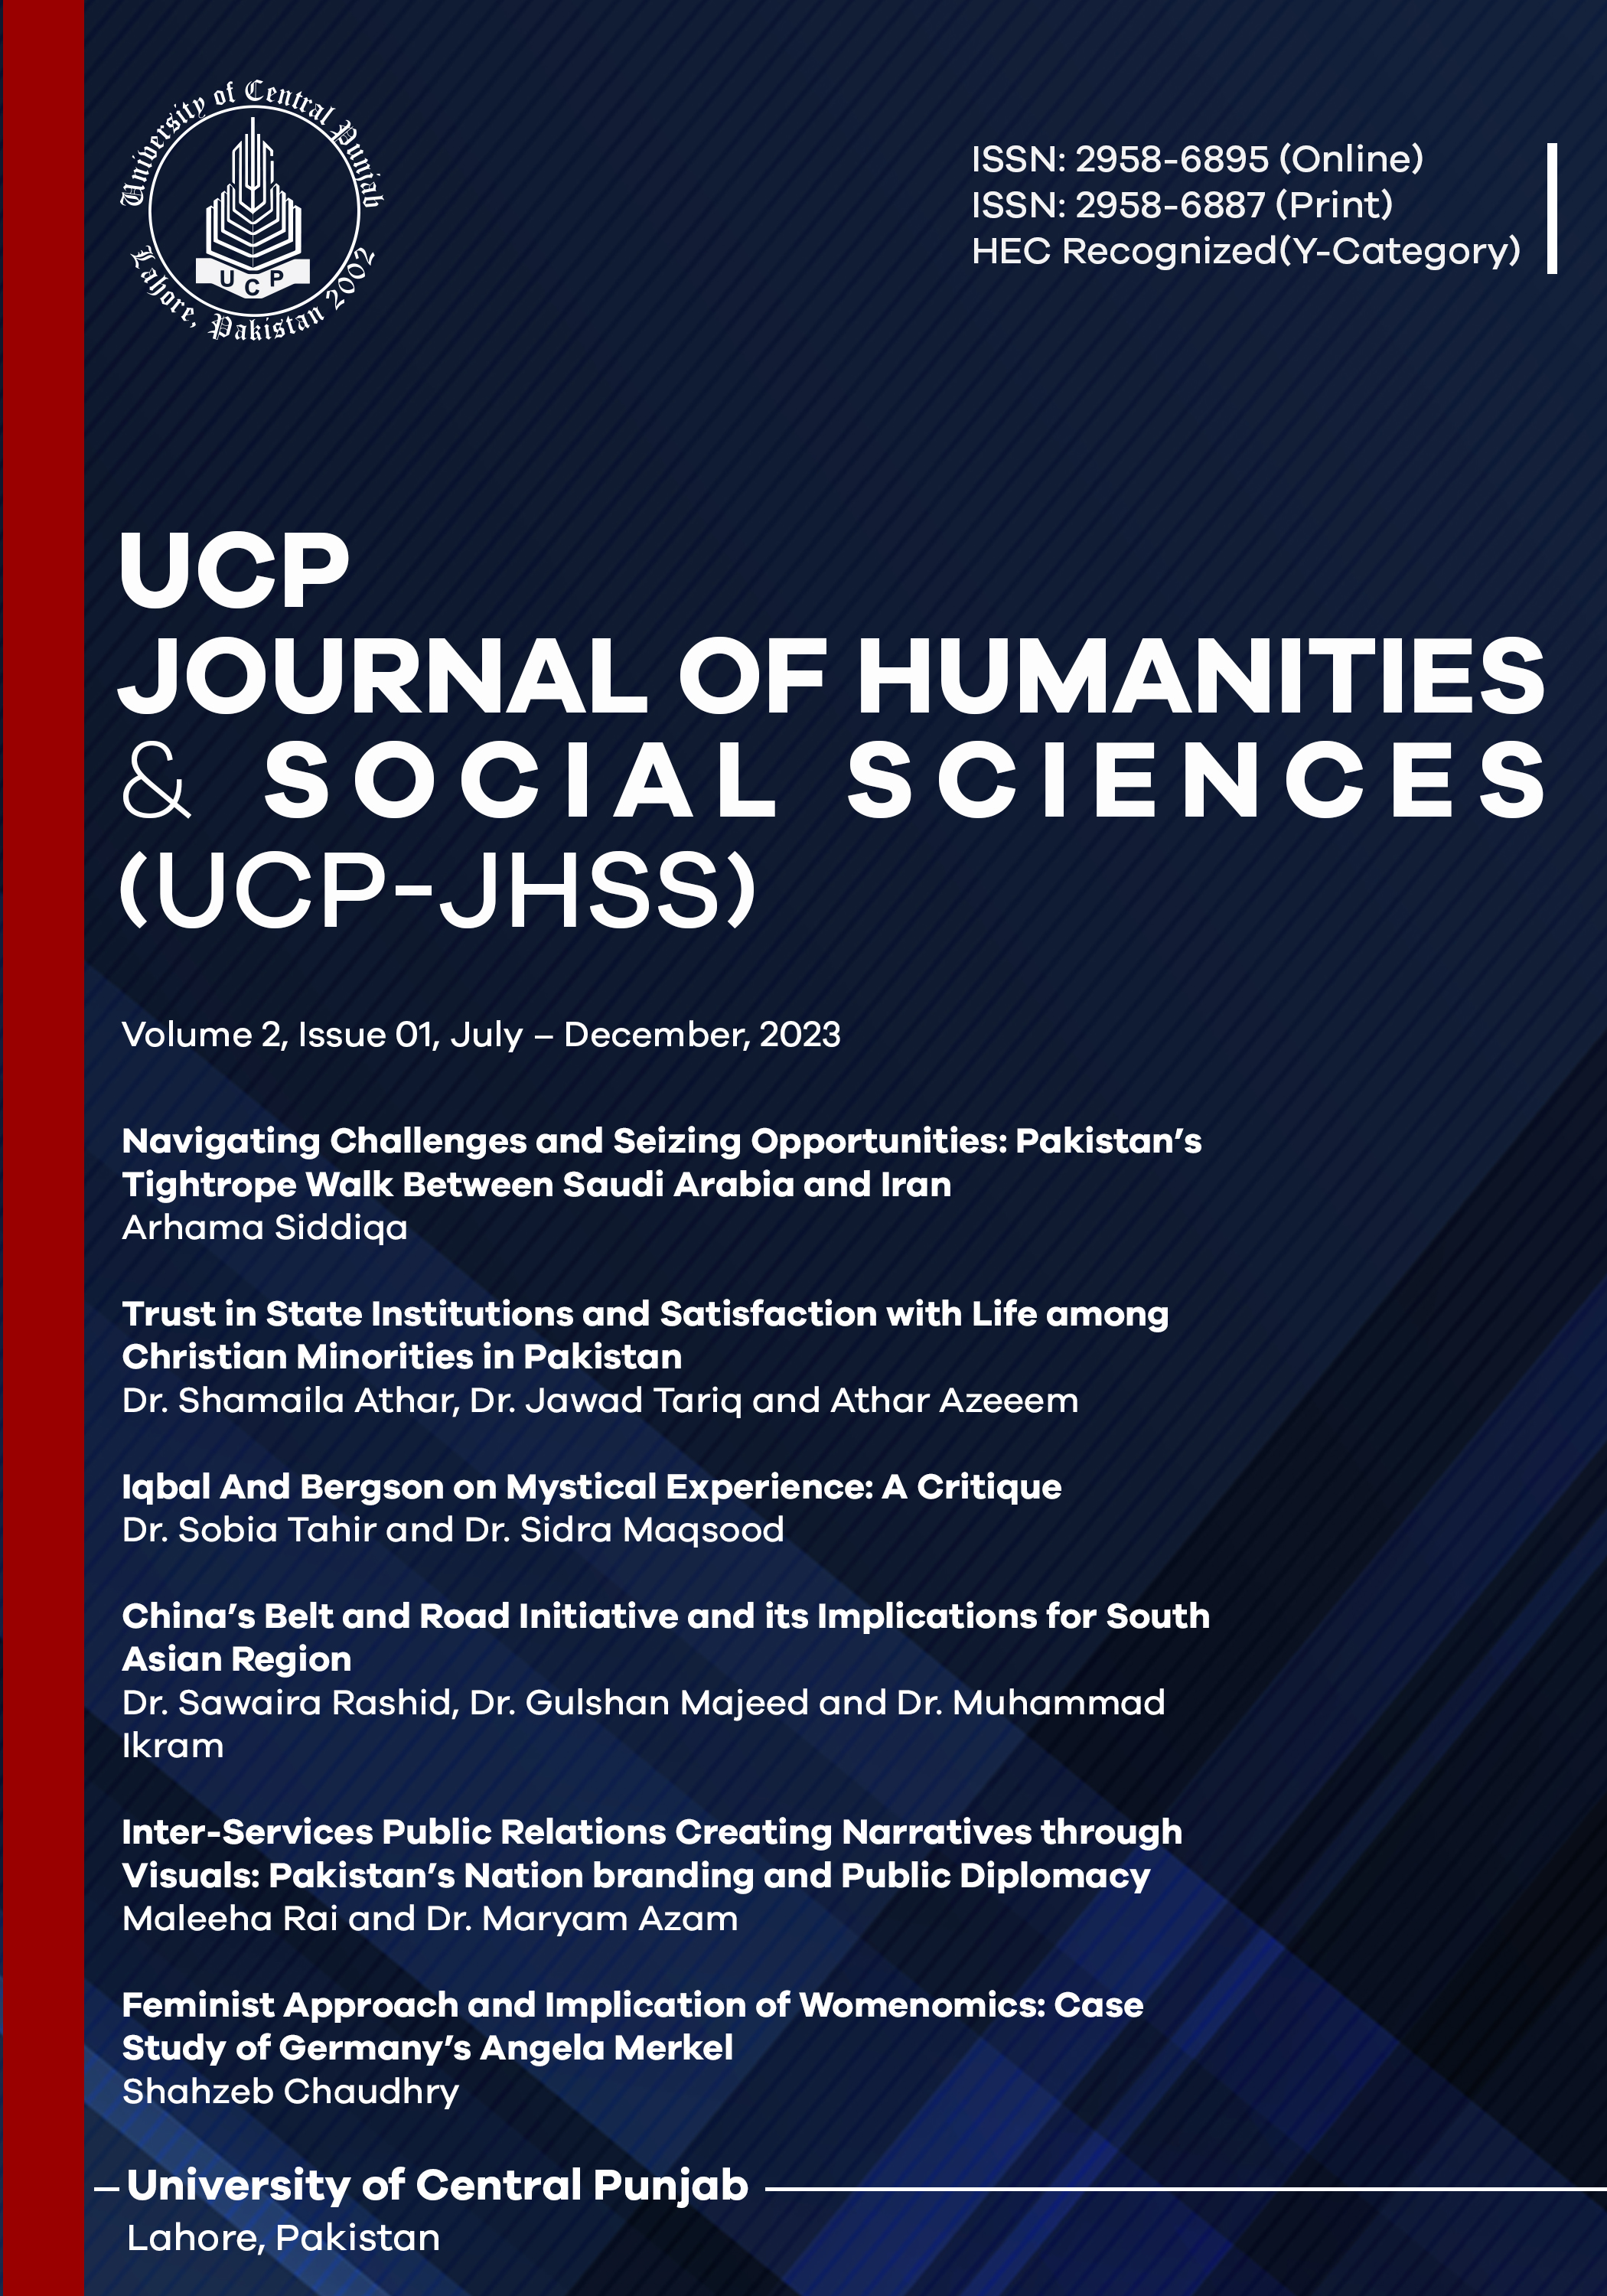 					View Vol. 2 No. 1 (2023): UCP Journal of Humanities and Social Sciences 
				